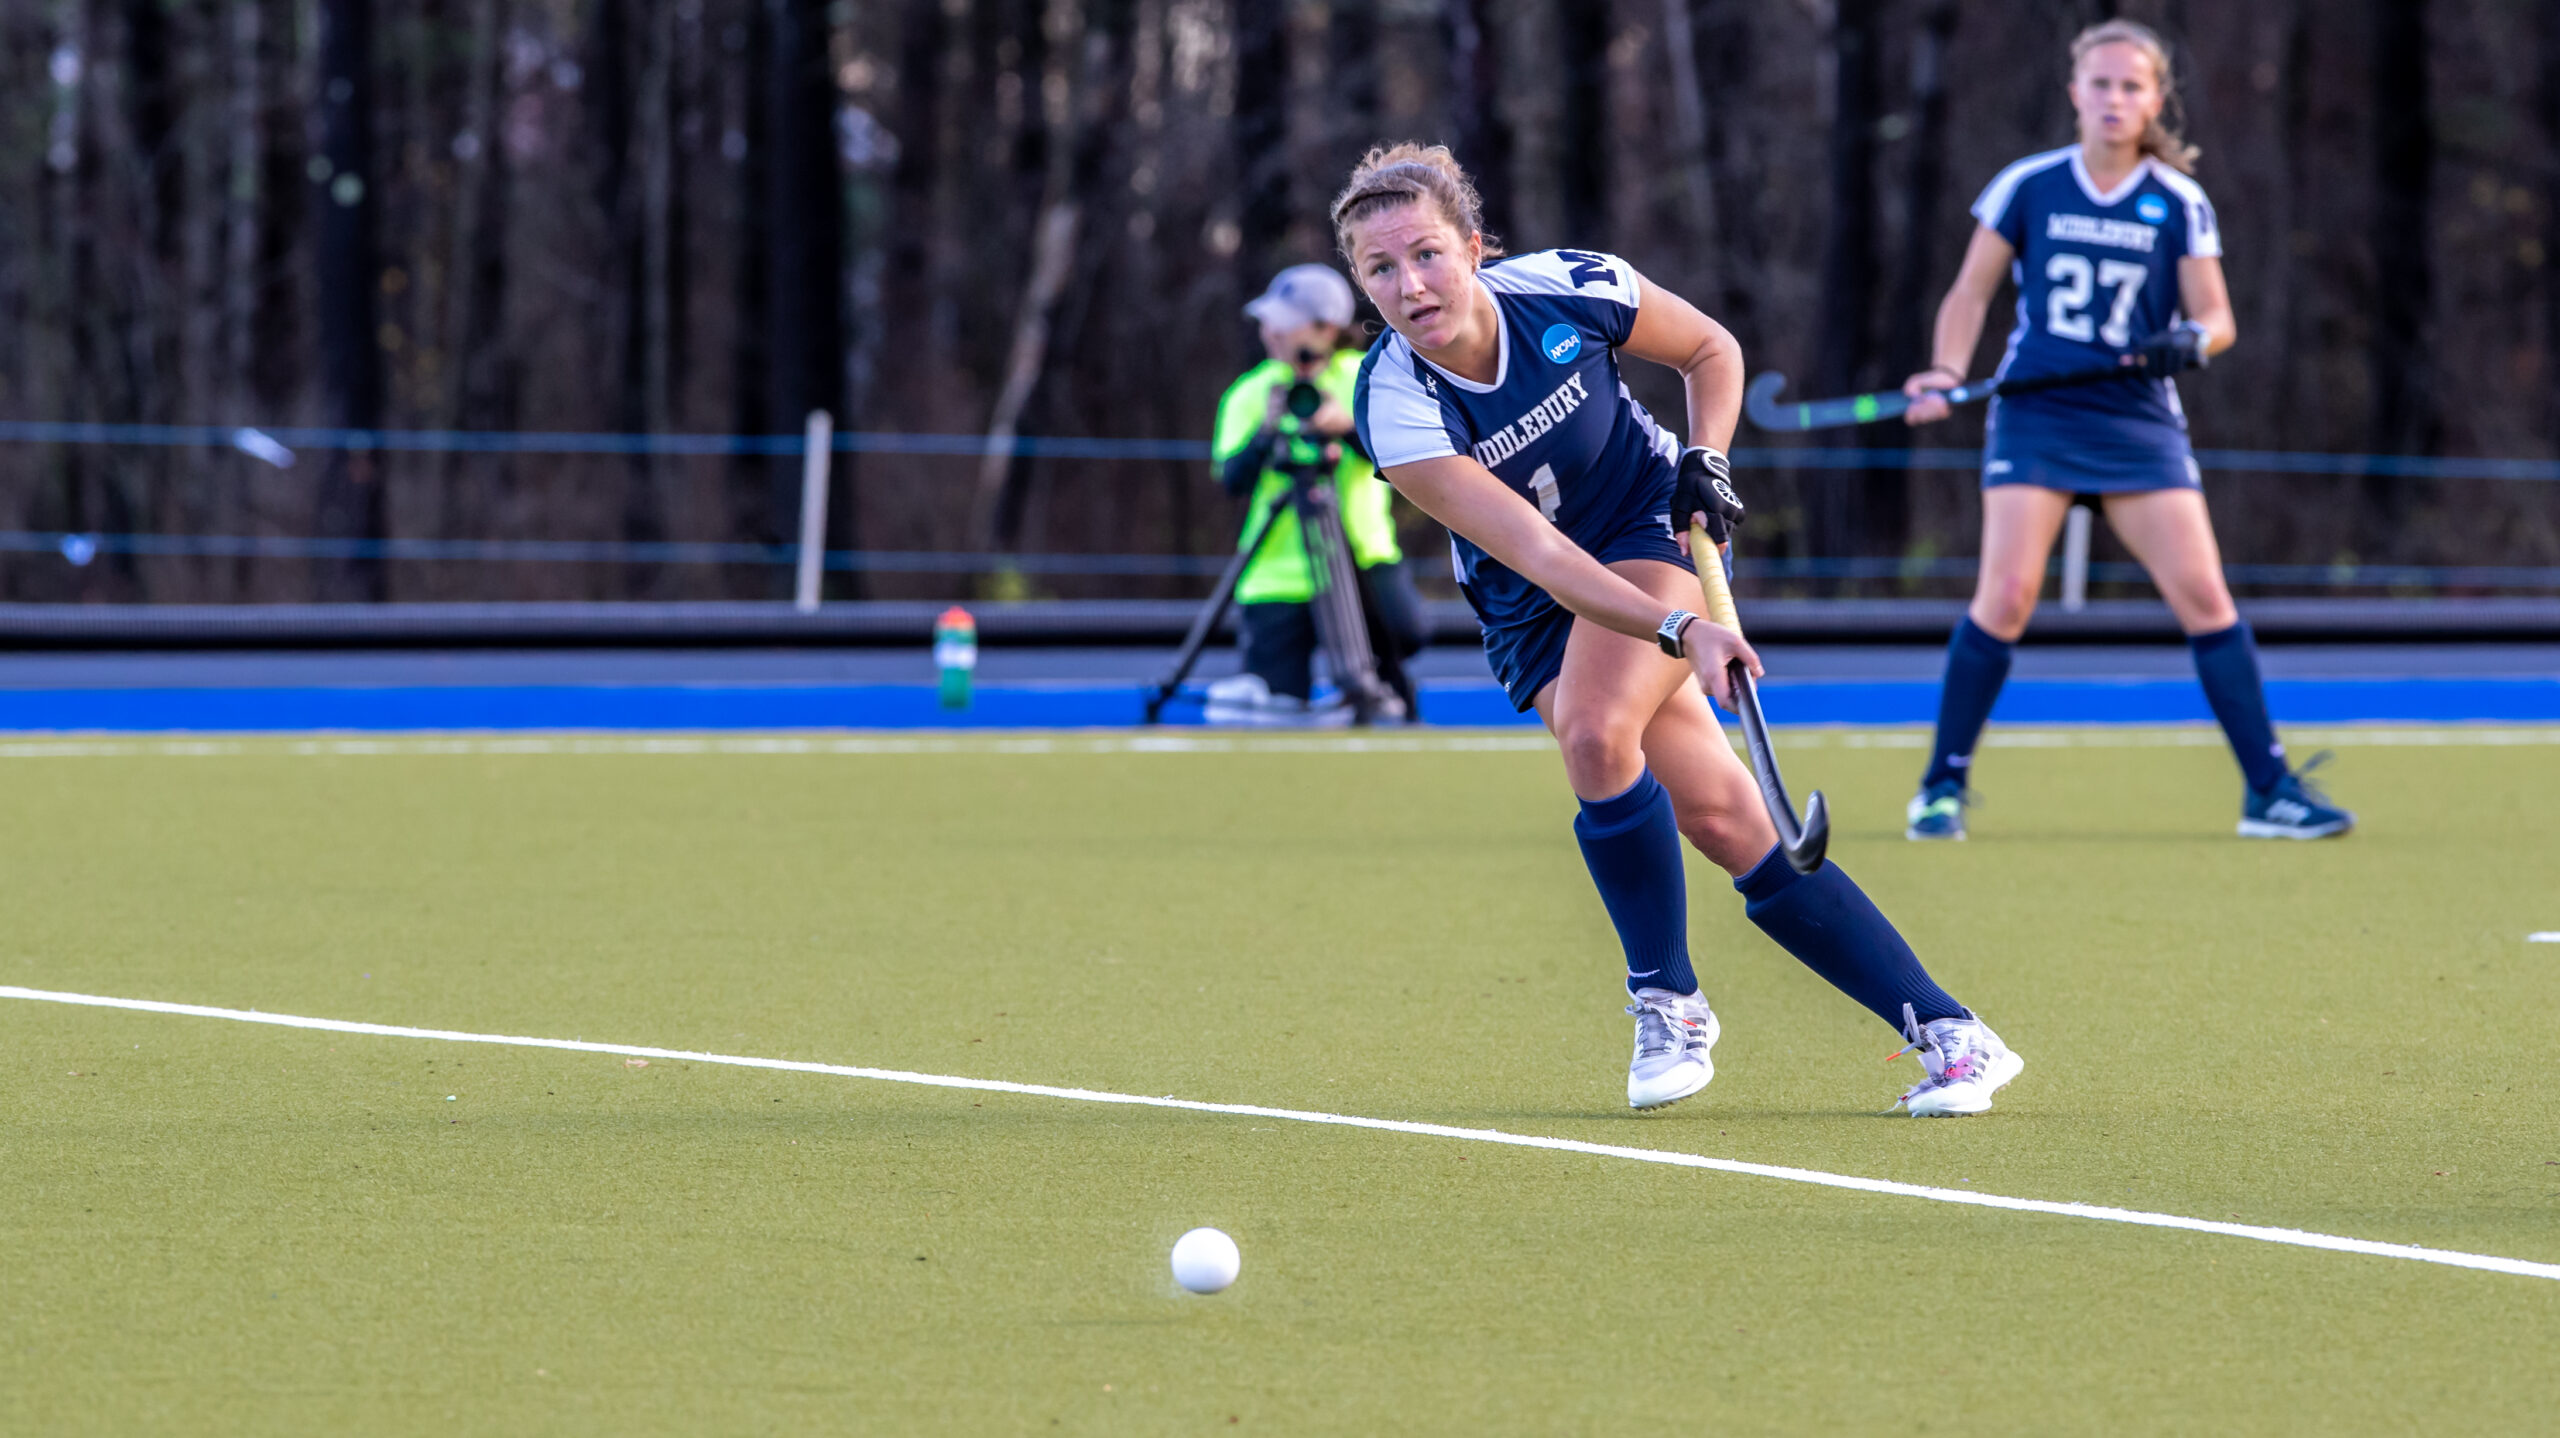 Charlotte Marks, Middlebury College